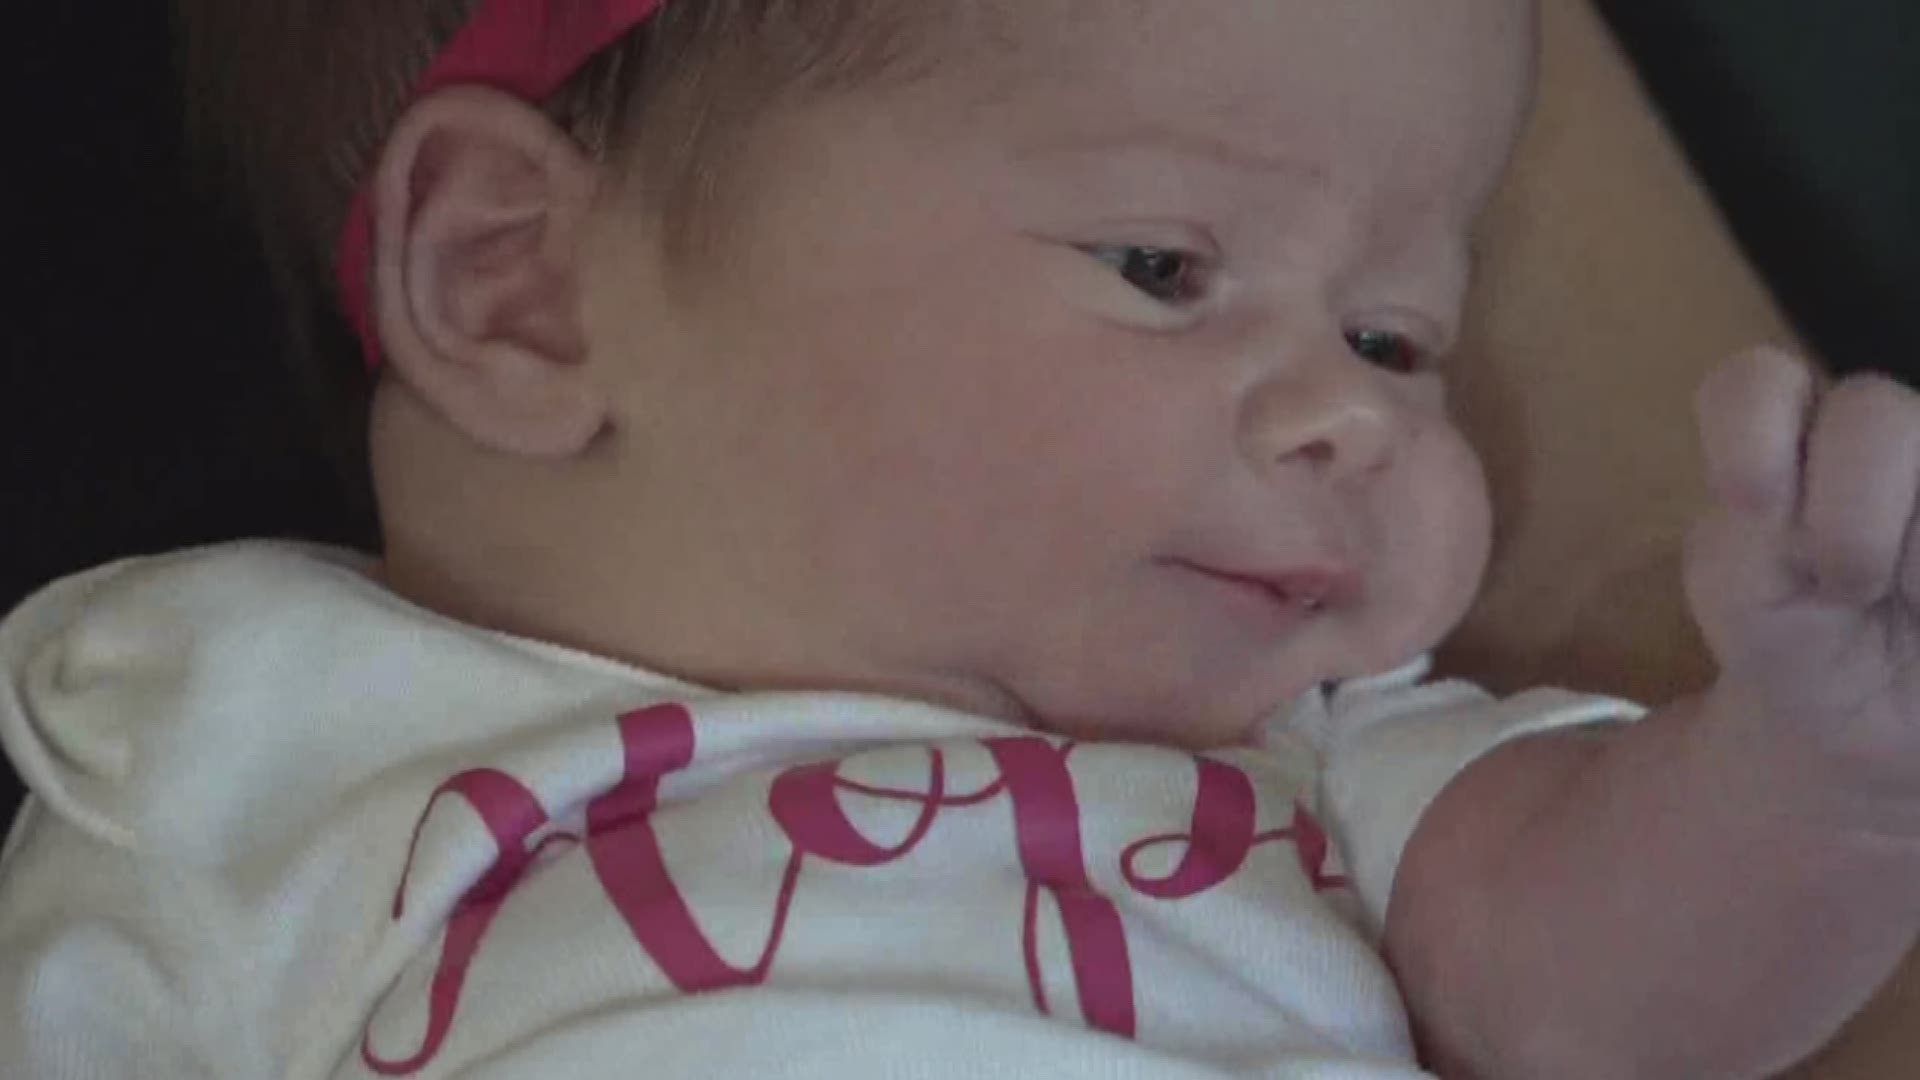 Hope Chimeno was only 13 days old when she and her family were rescued by boat in Orange.